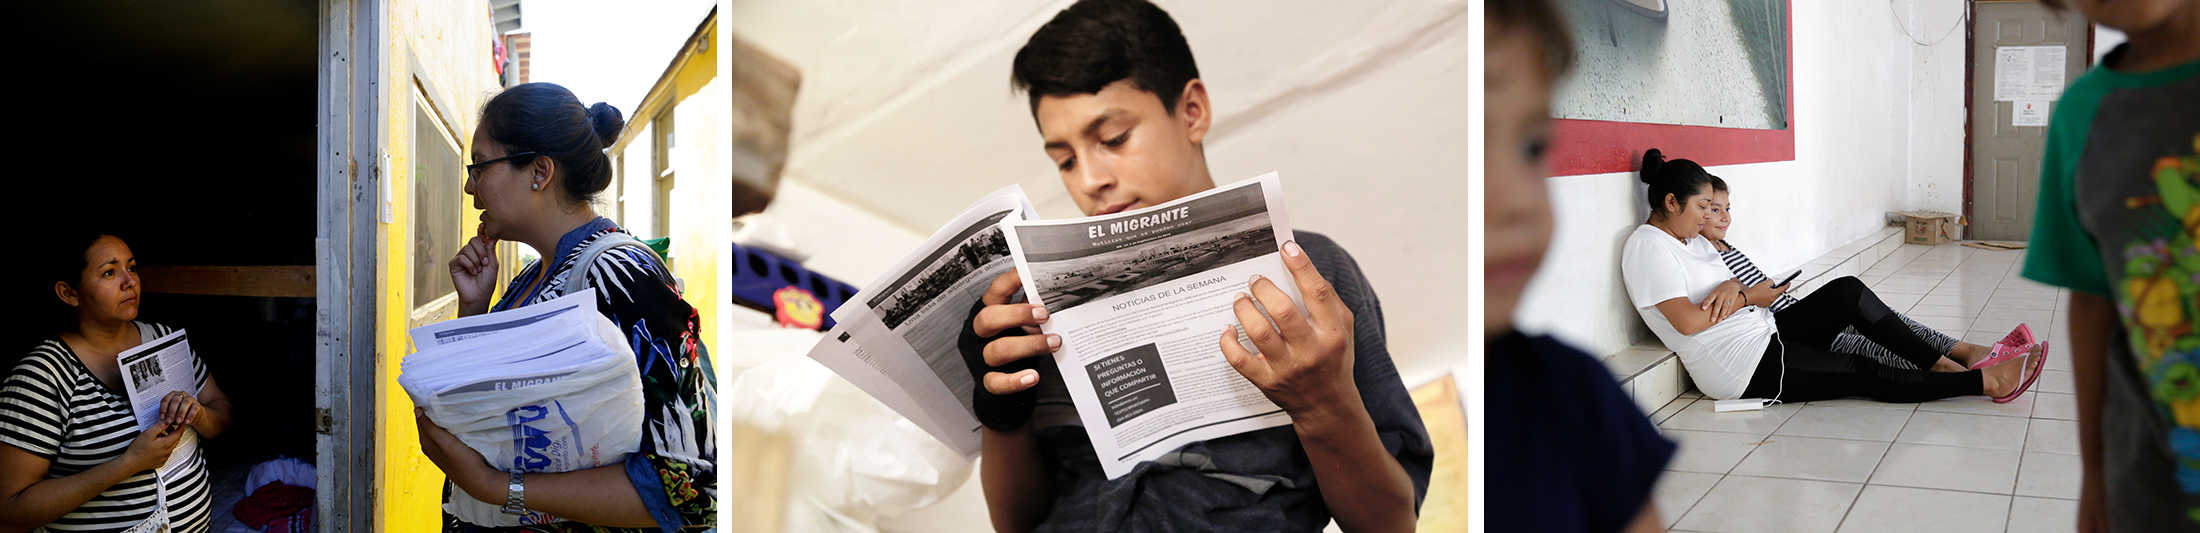 3 photos showing people reading the El Migrante newsletter